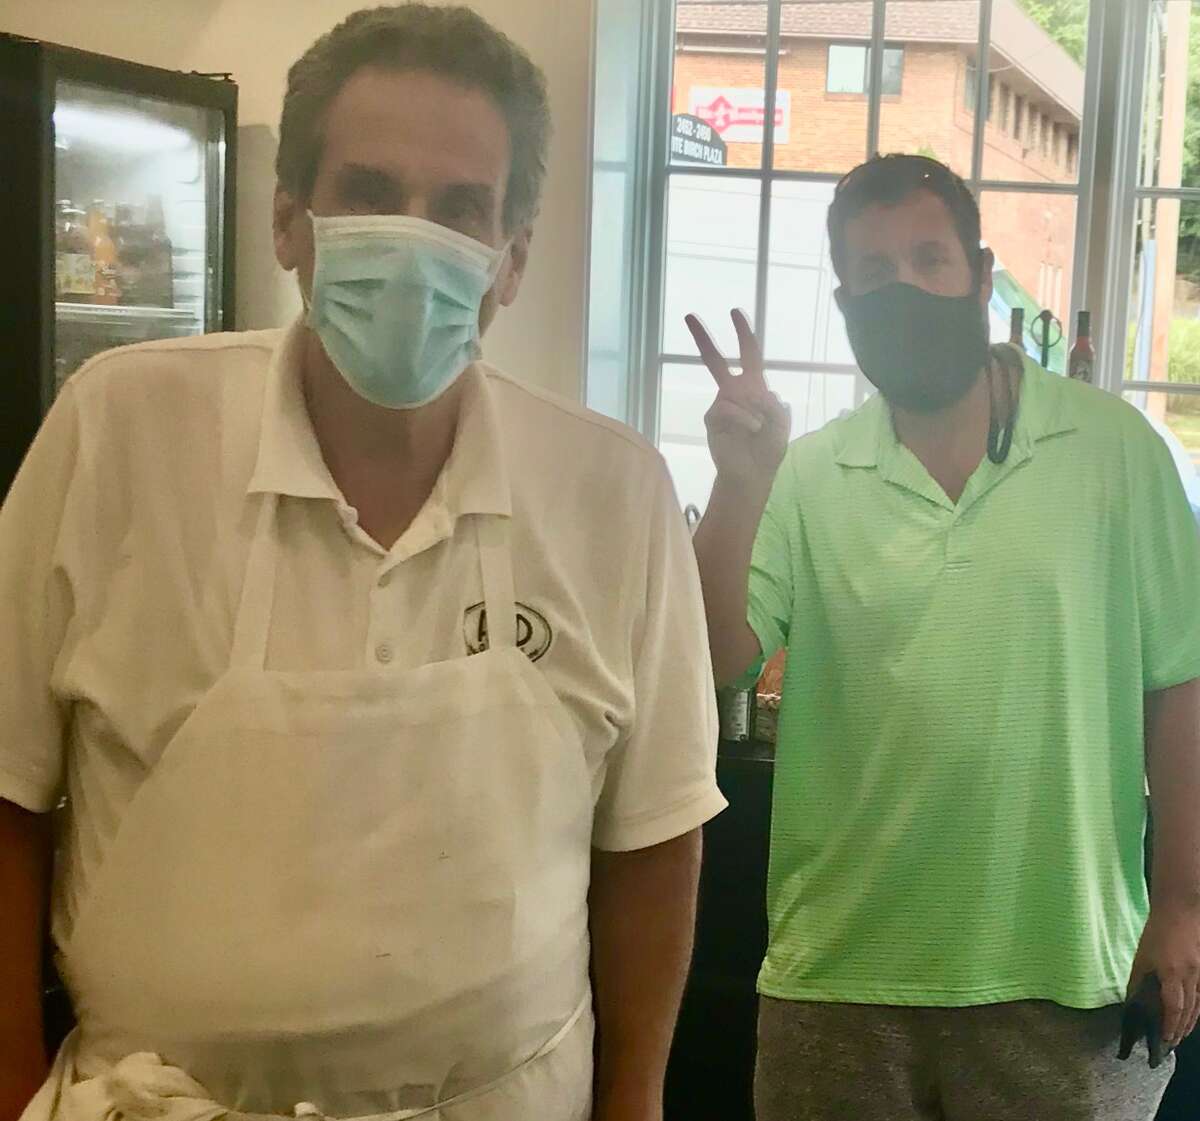 Adam Sandler stopped by Fred 06825 in Fairfield to pick up food on Sept. 28, 2020.